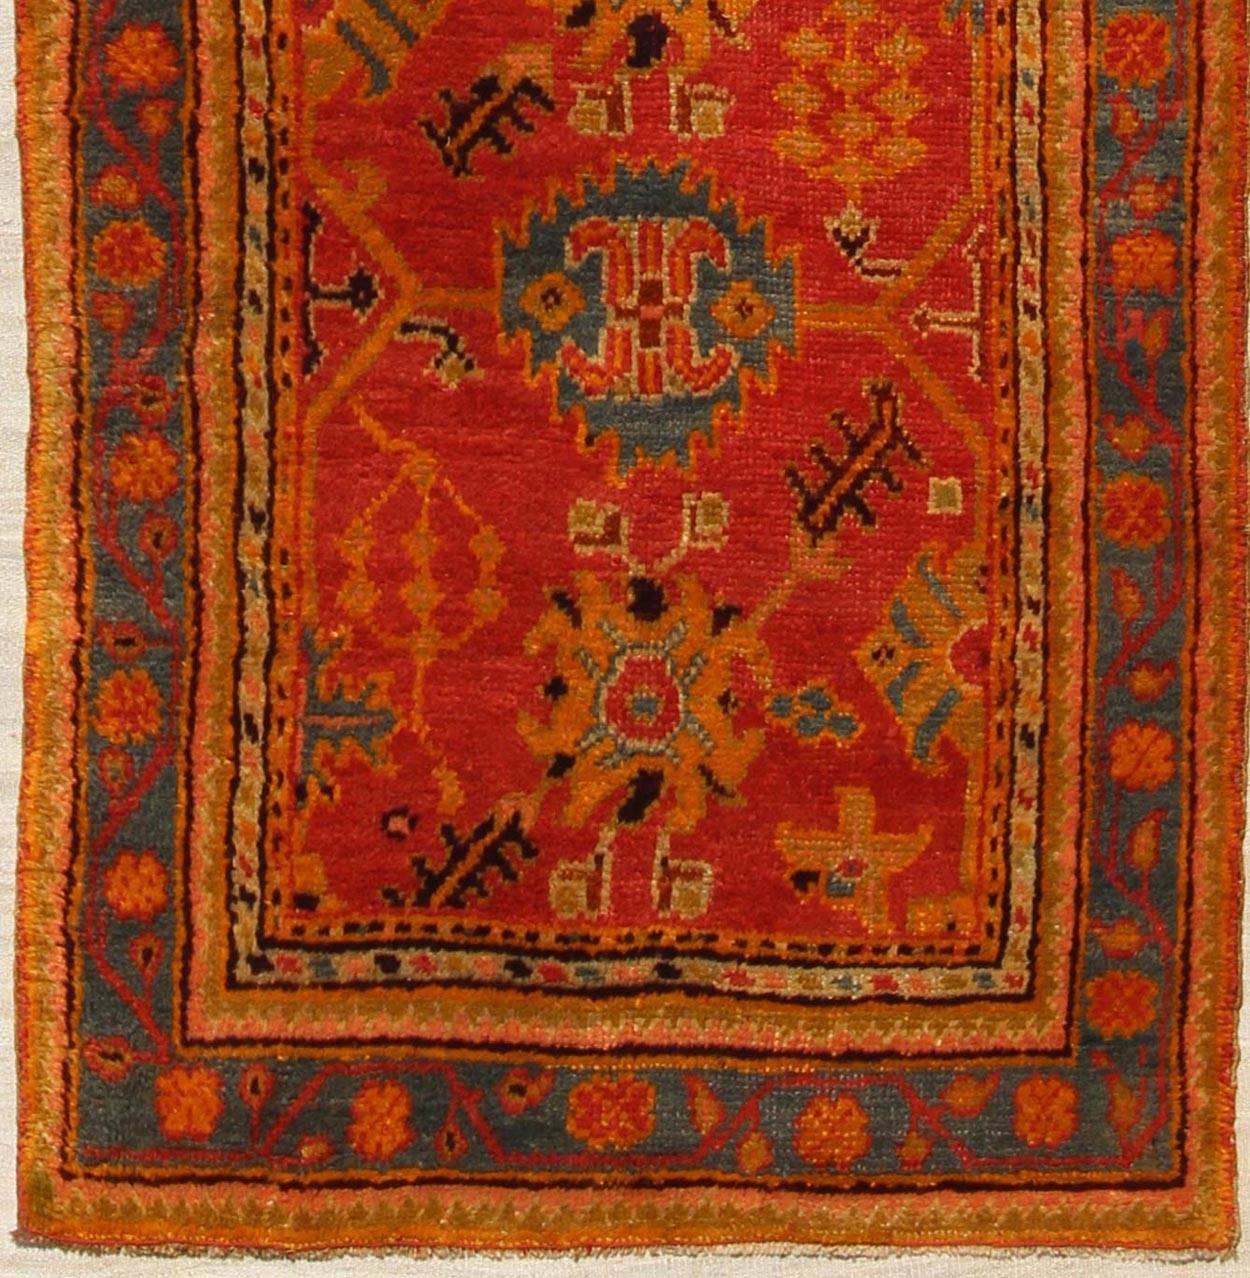 Red and tan and multi colors antique Turkish Oushak runner with sub-geometric tribal motifs, rug 16-1002, country of origin / type: Turkey / Oushak, circa 1910

This antique Oushak runner features a unique blend of cheerful colors and an